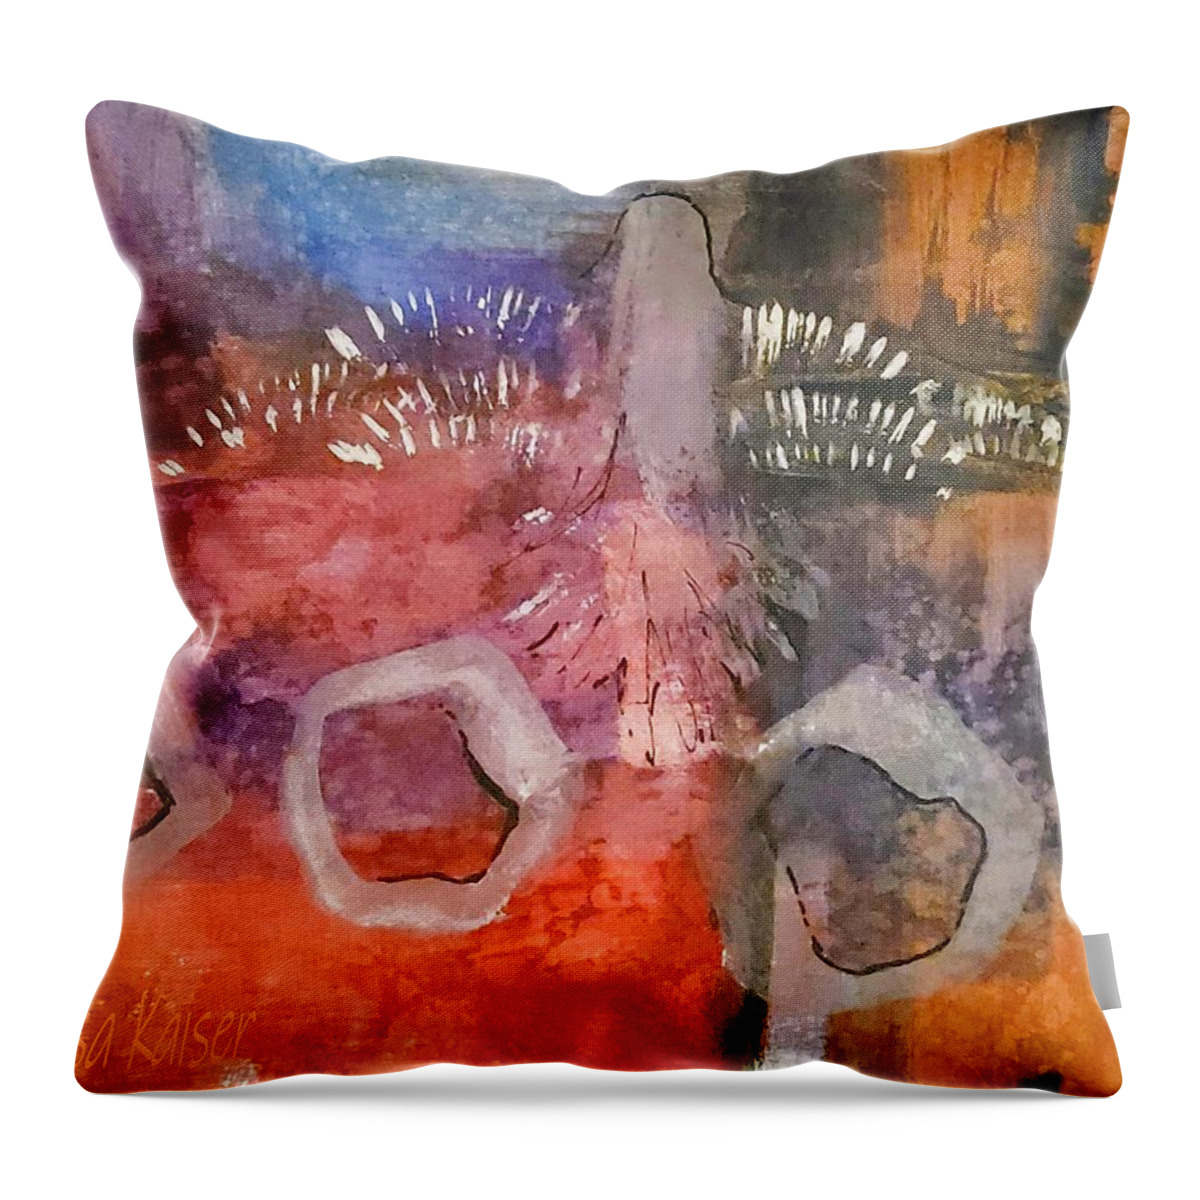 Uncaged Throw Pillow featuring the painting Uncaged by Lisa Kaiser